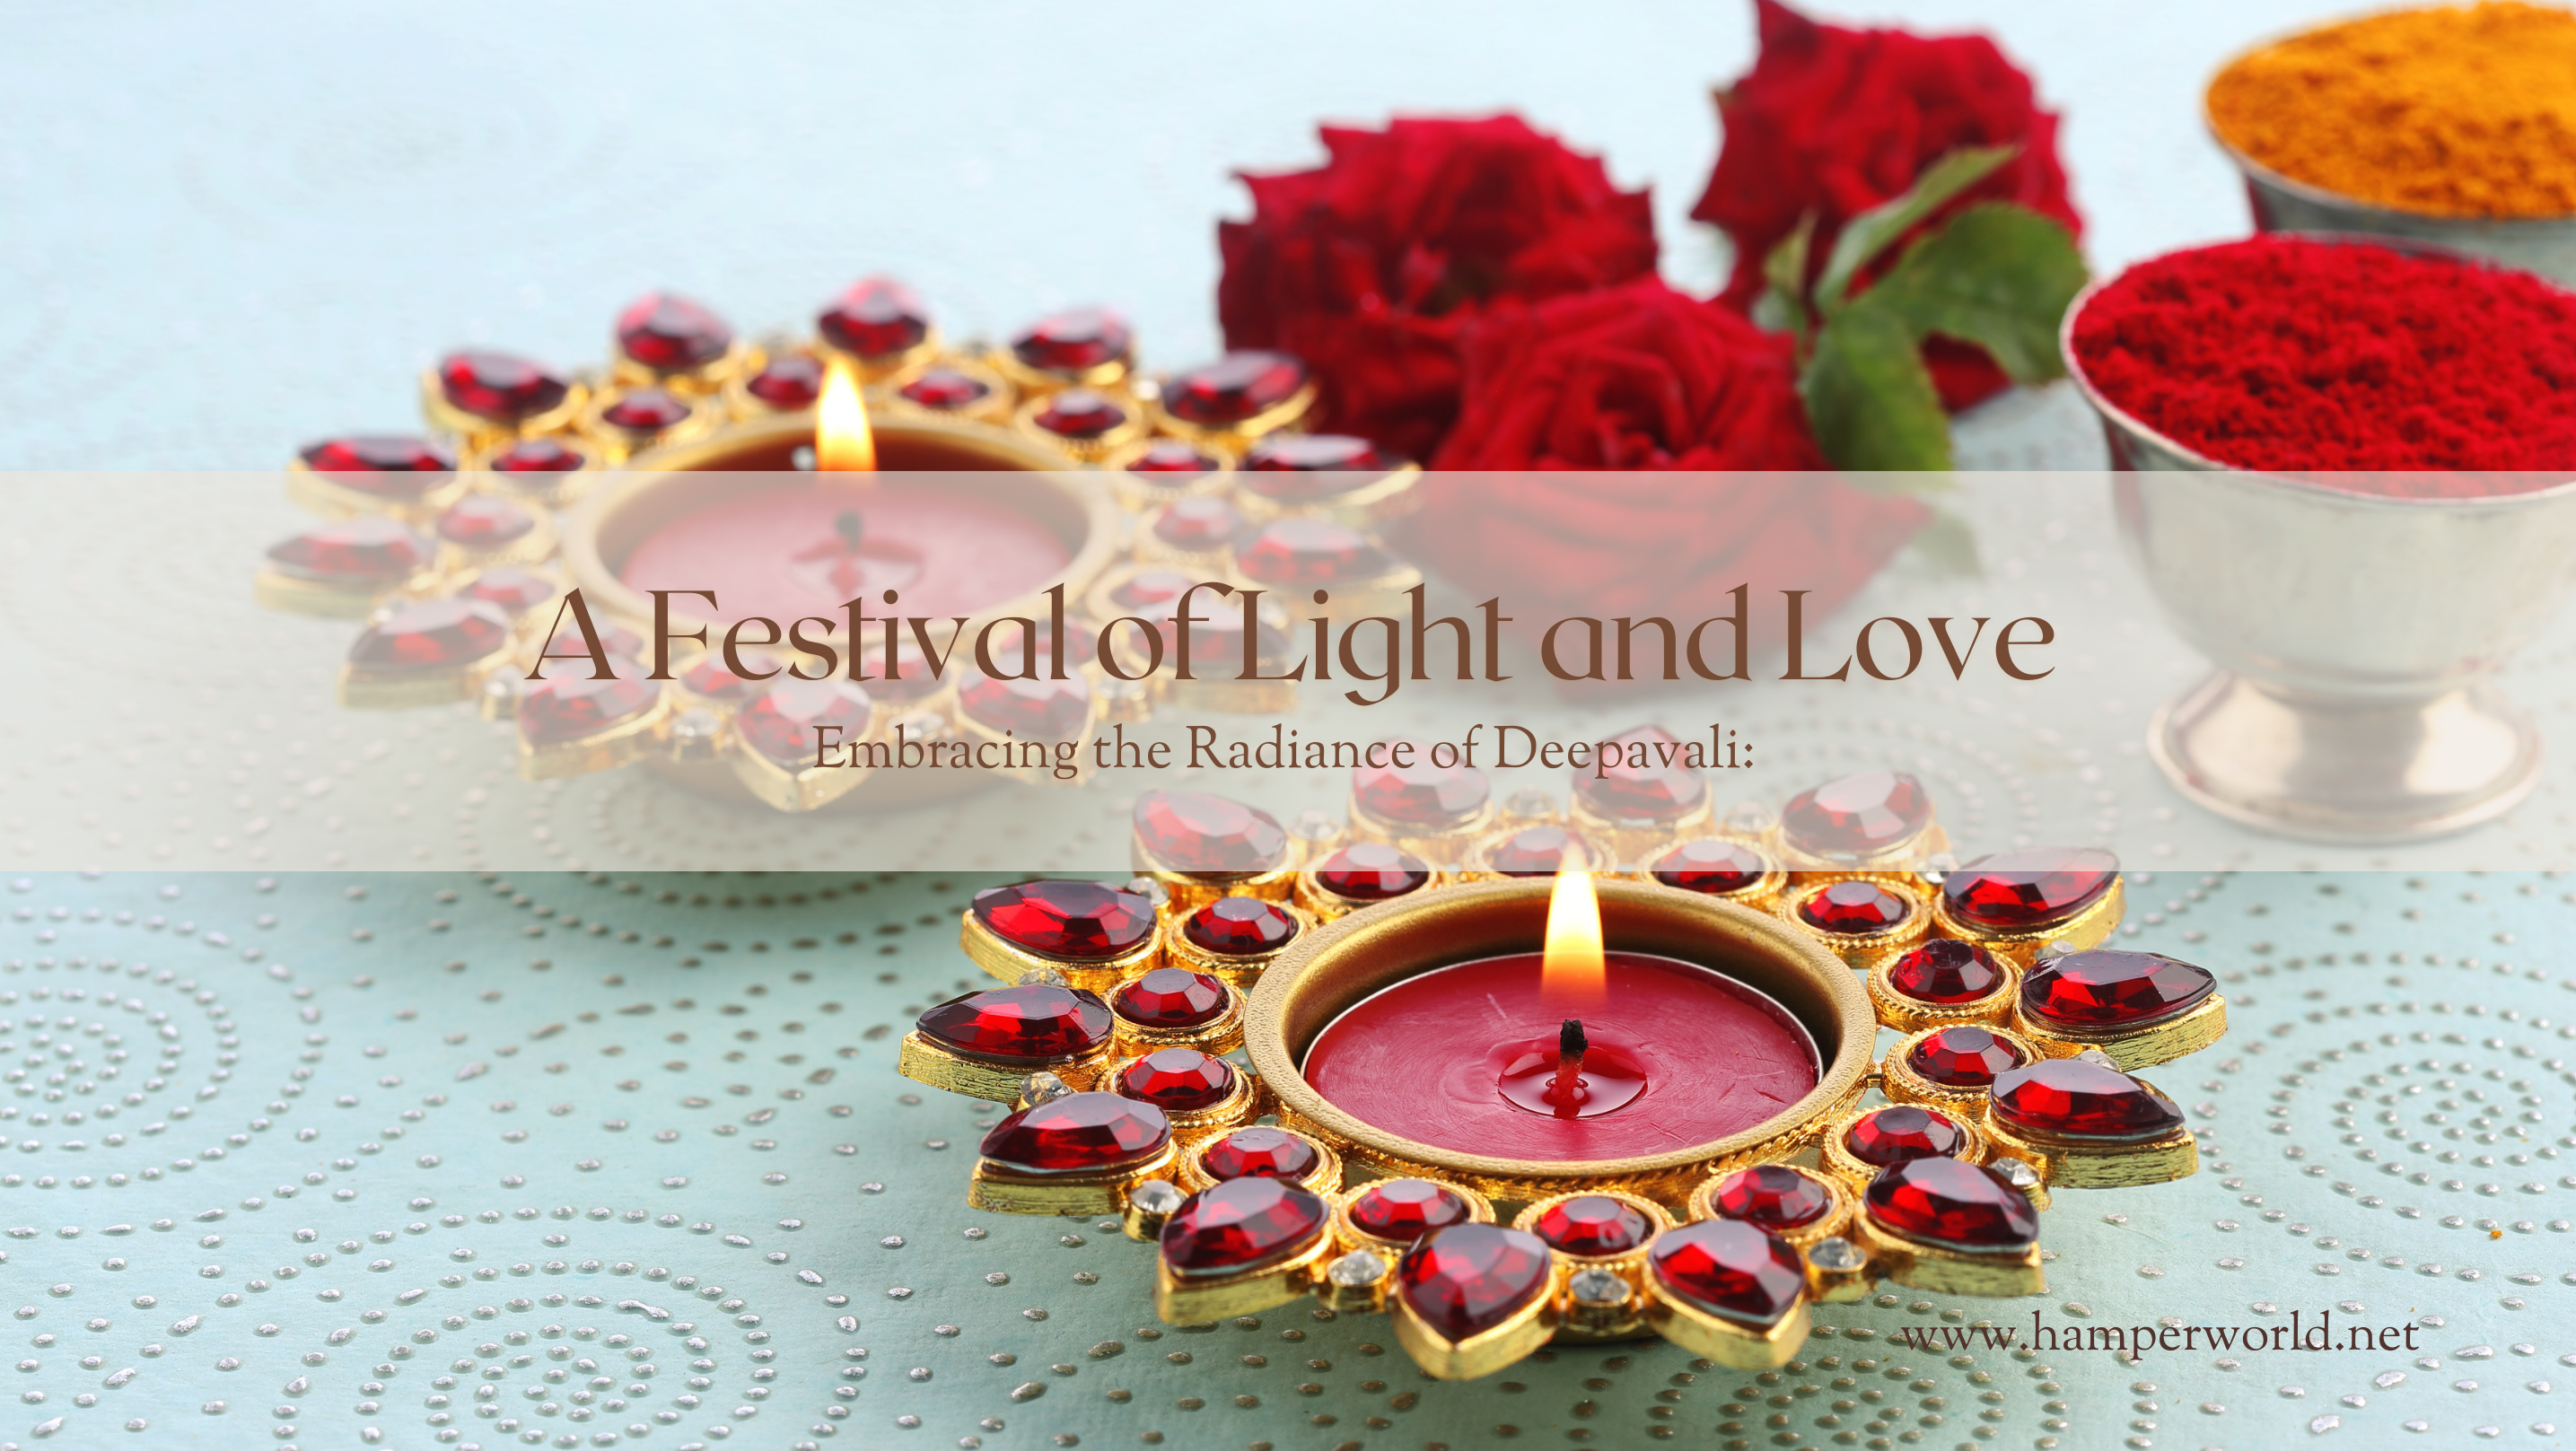 Embracing the Radiance of Deepavali: A Festival of Light and Love